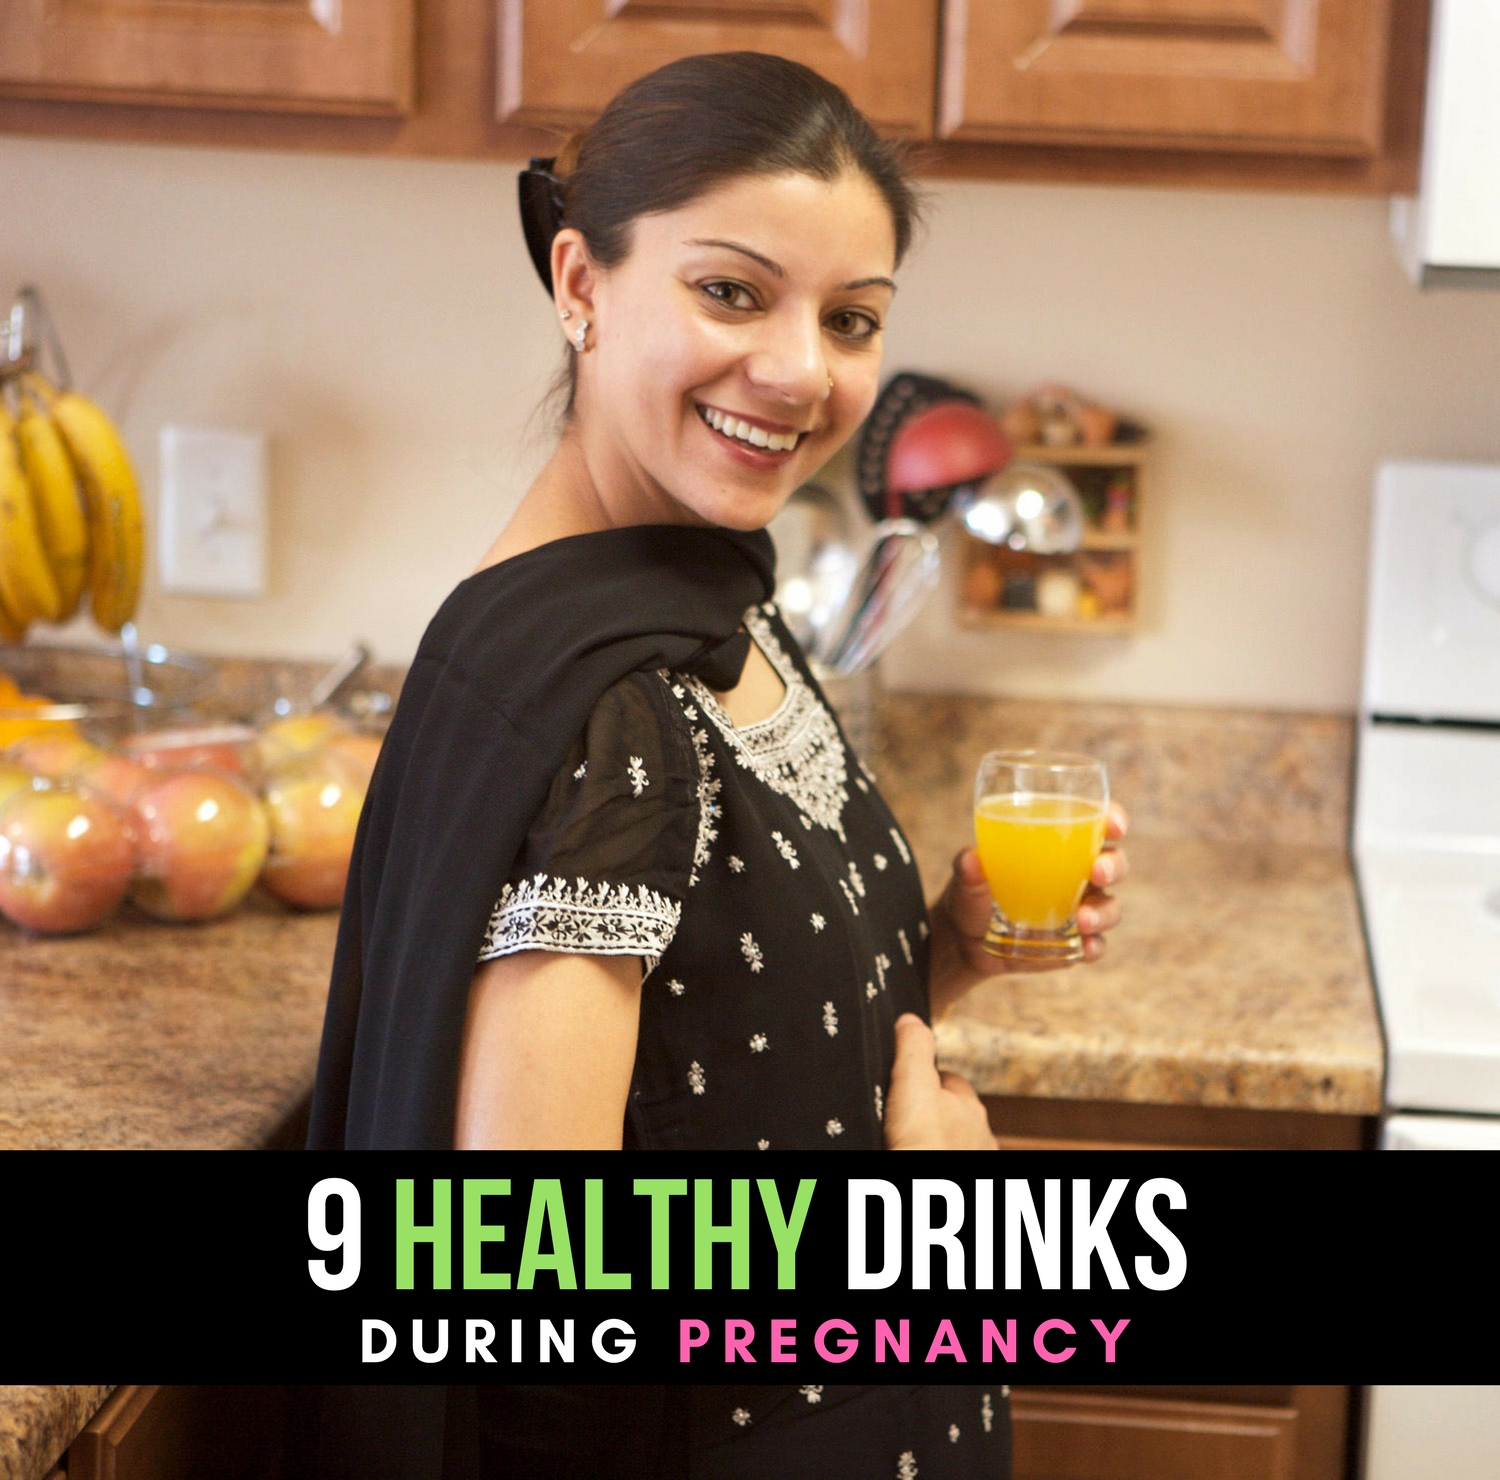 9 Healthy Drinks during Pregnancy